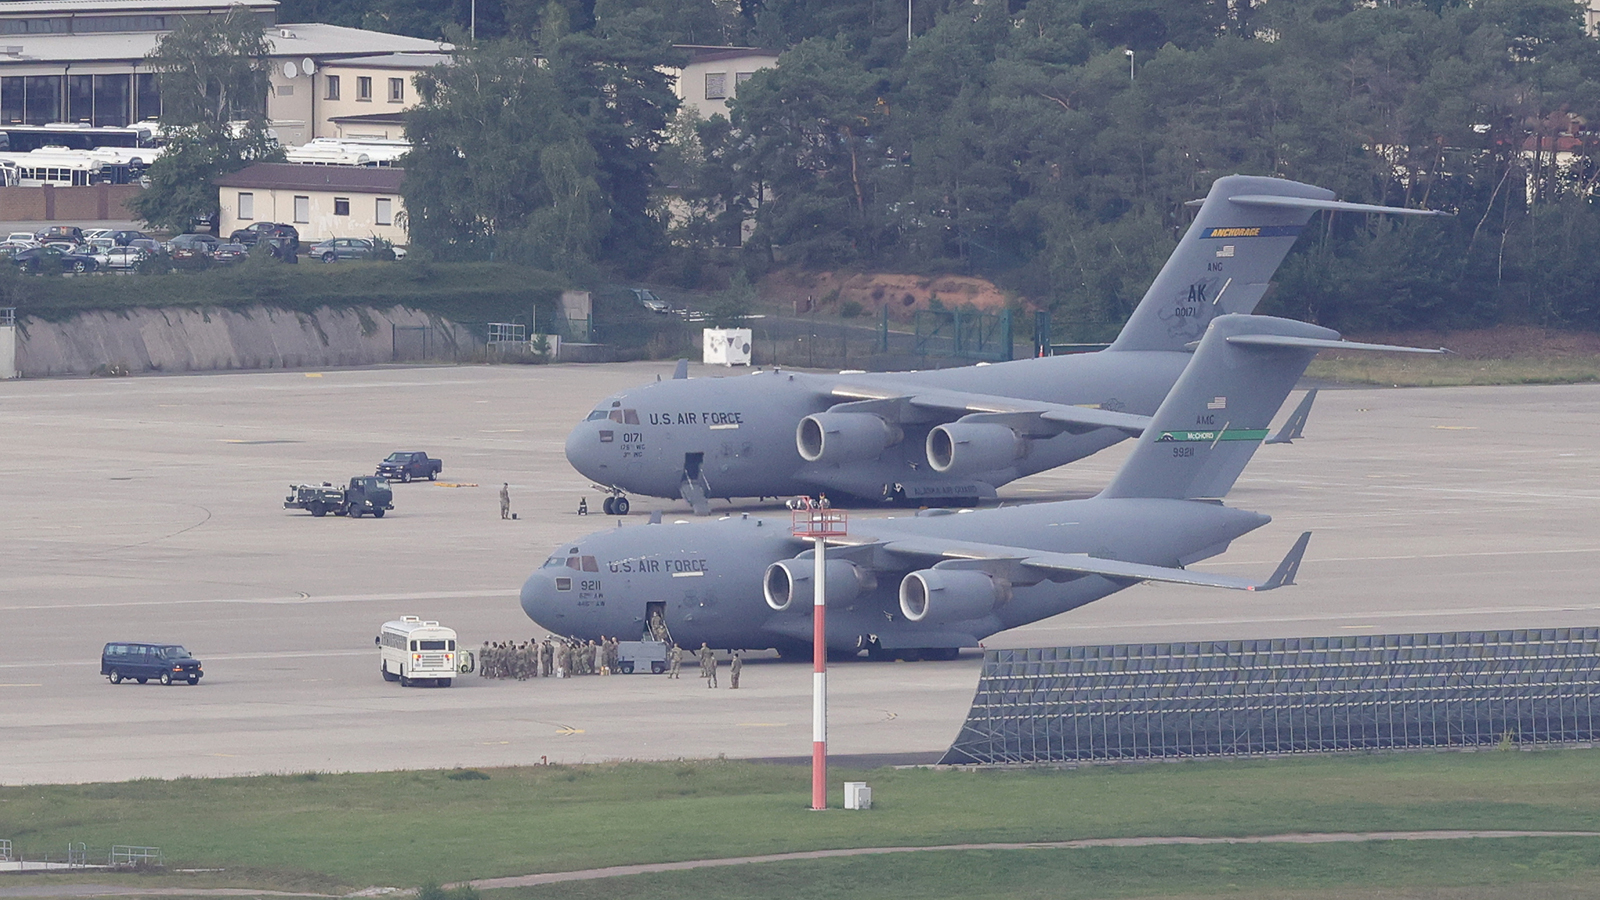 A general view of the Ramstein Air Base of the United States Air Force on August 26 in Ramstein-Miesenbach, Germany.